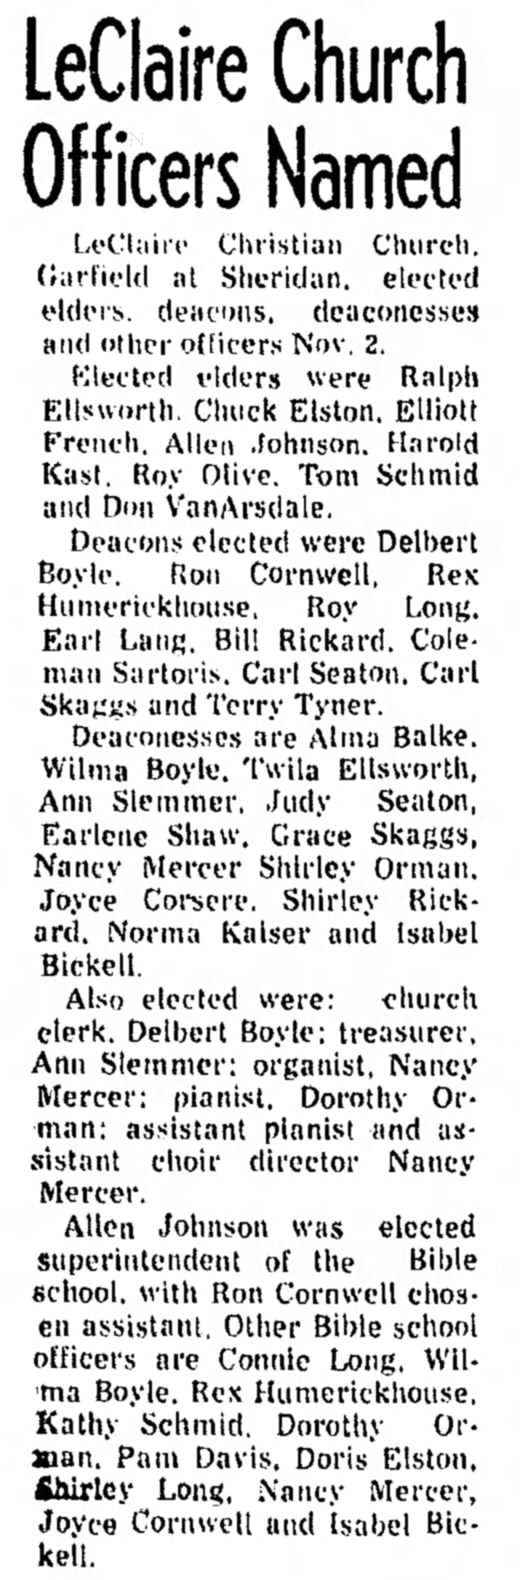 Nov. 7, 1975 LeClaire Church Officers Named